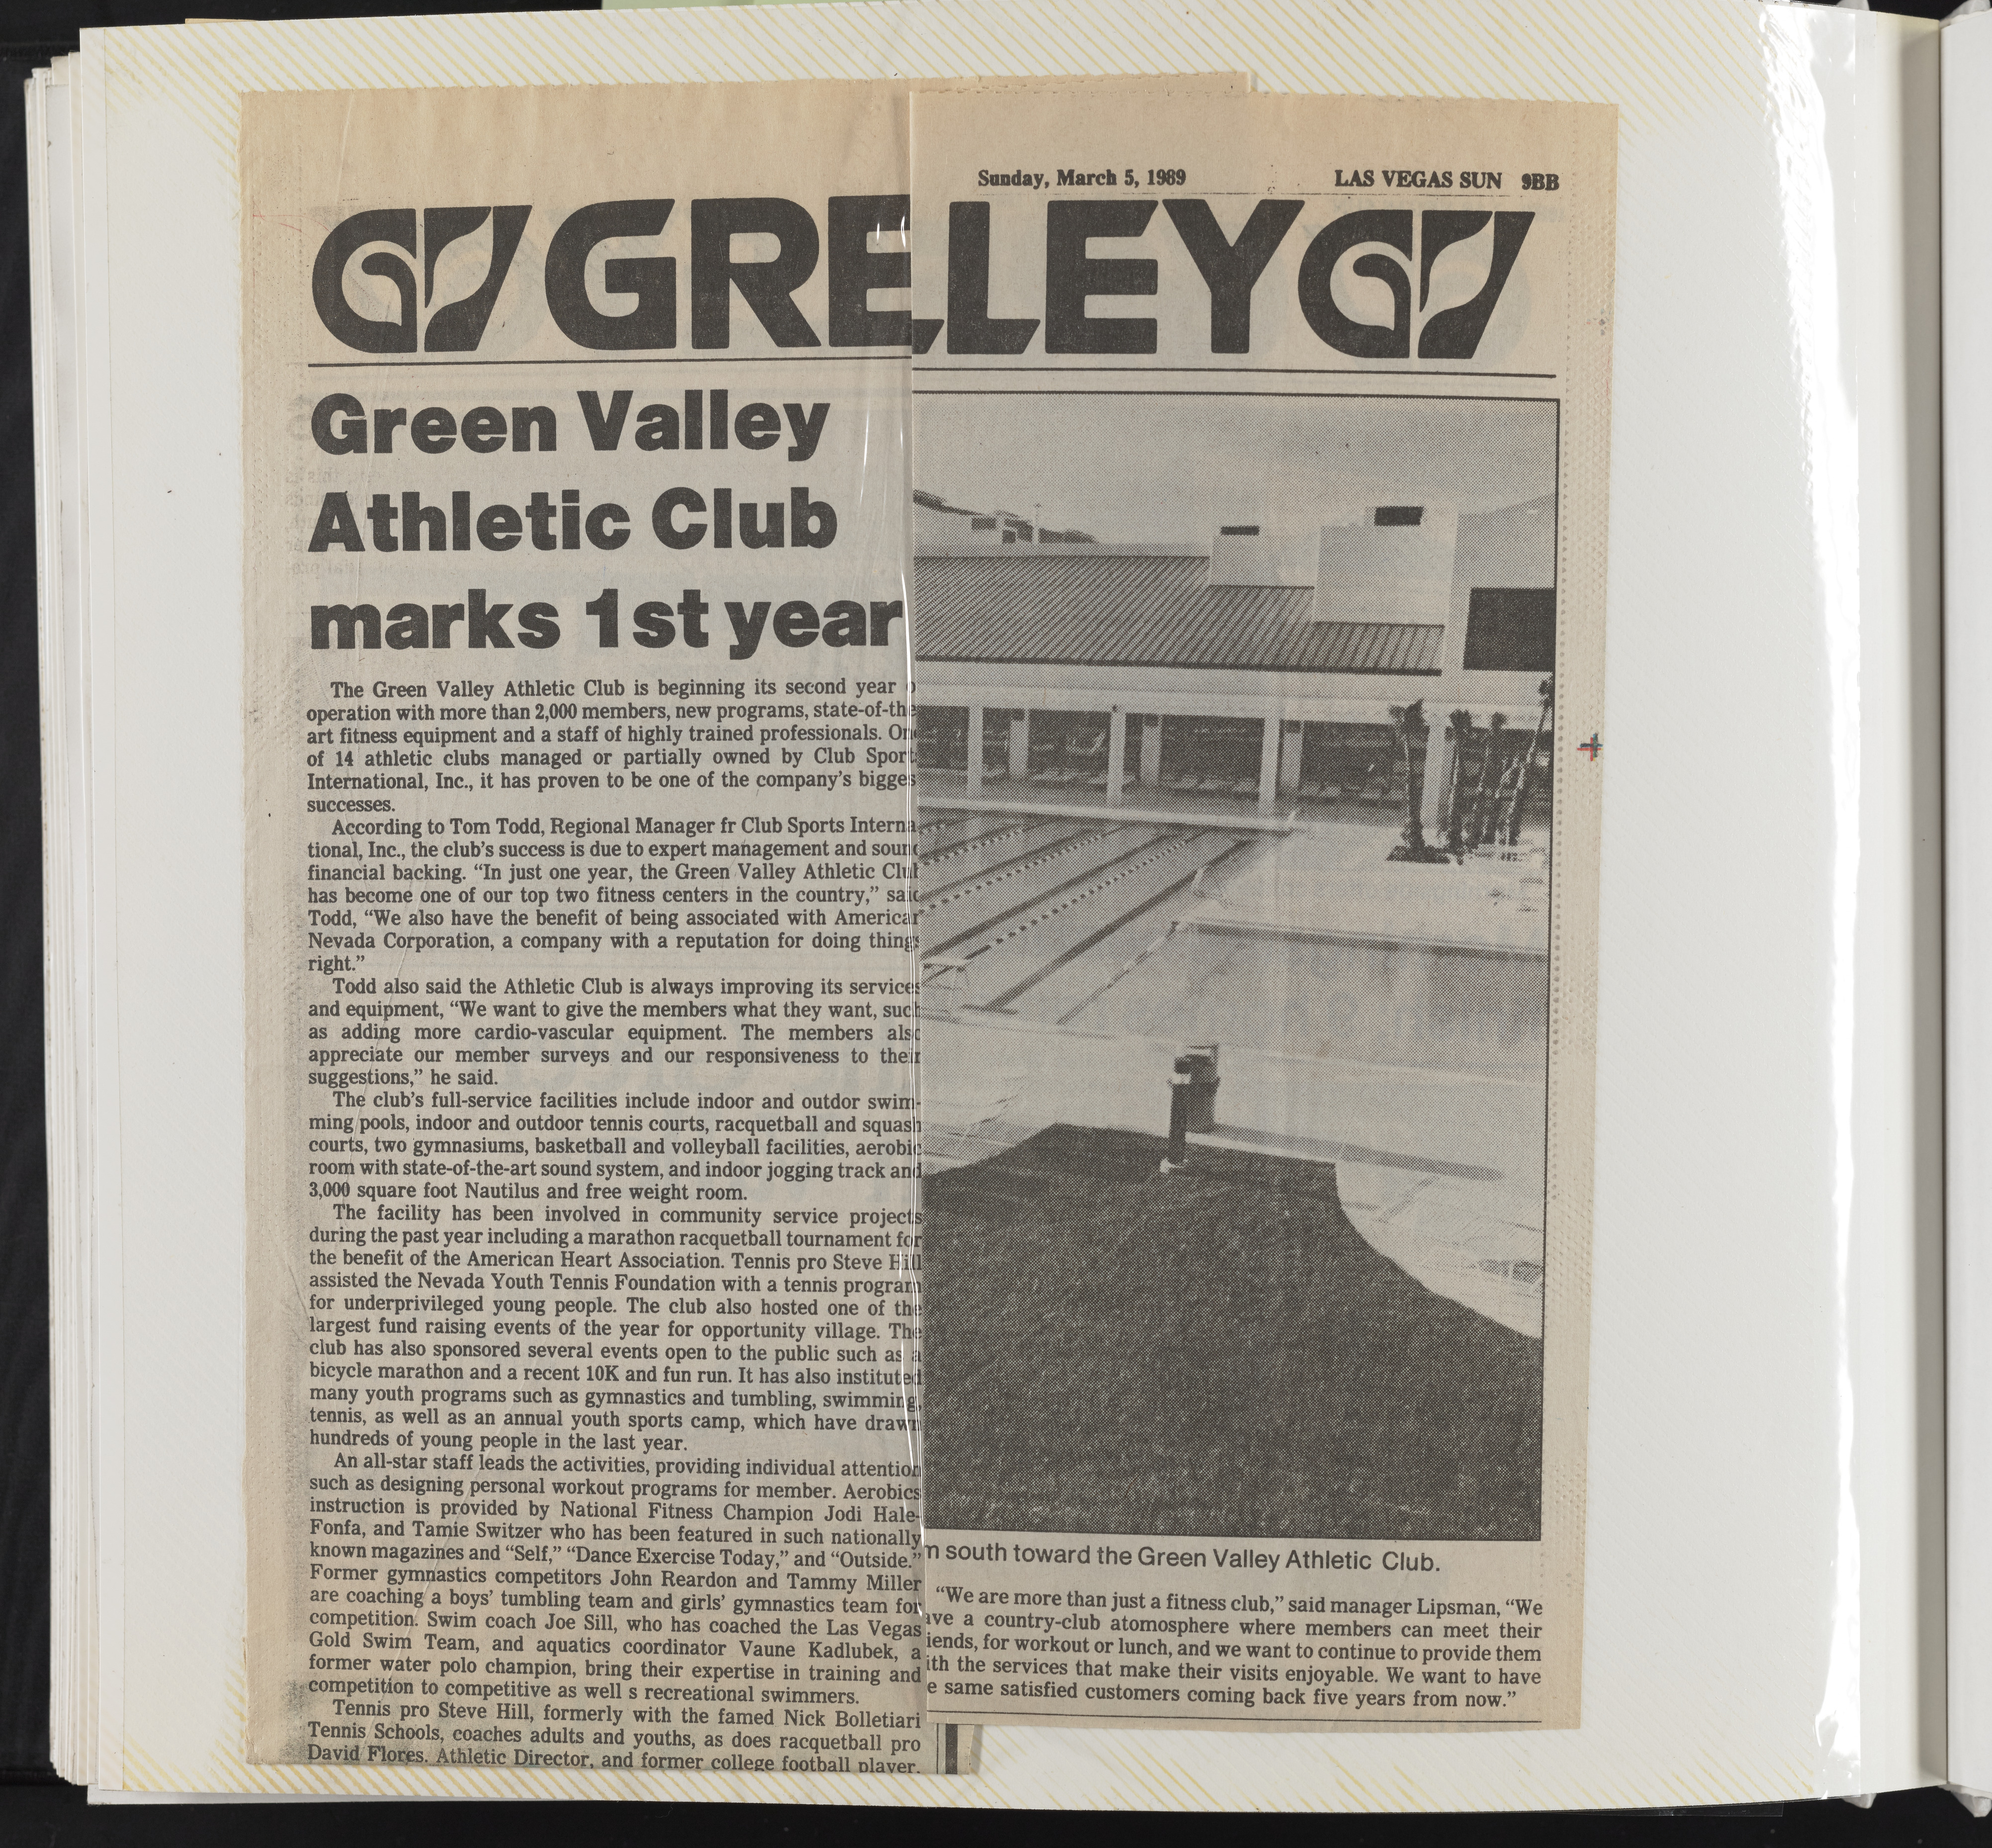 Newspaper clipping, Green Valley Athletic Club marks 1st year, Las Vegas Sun, March 5, 1989